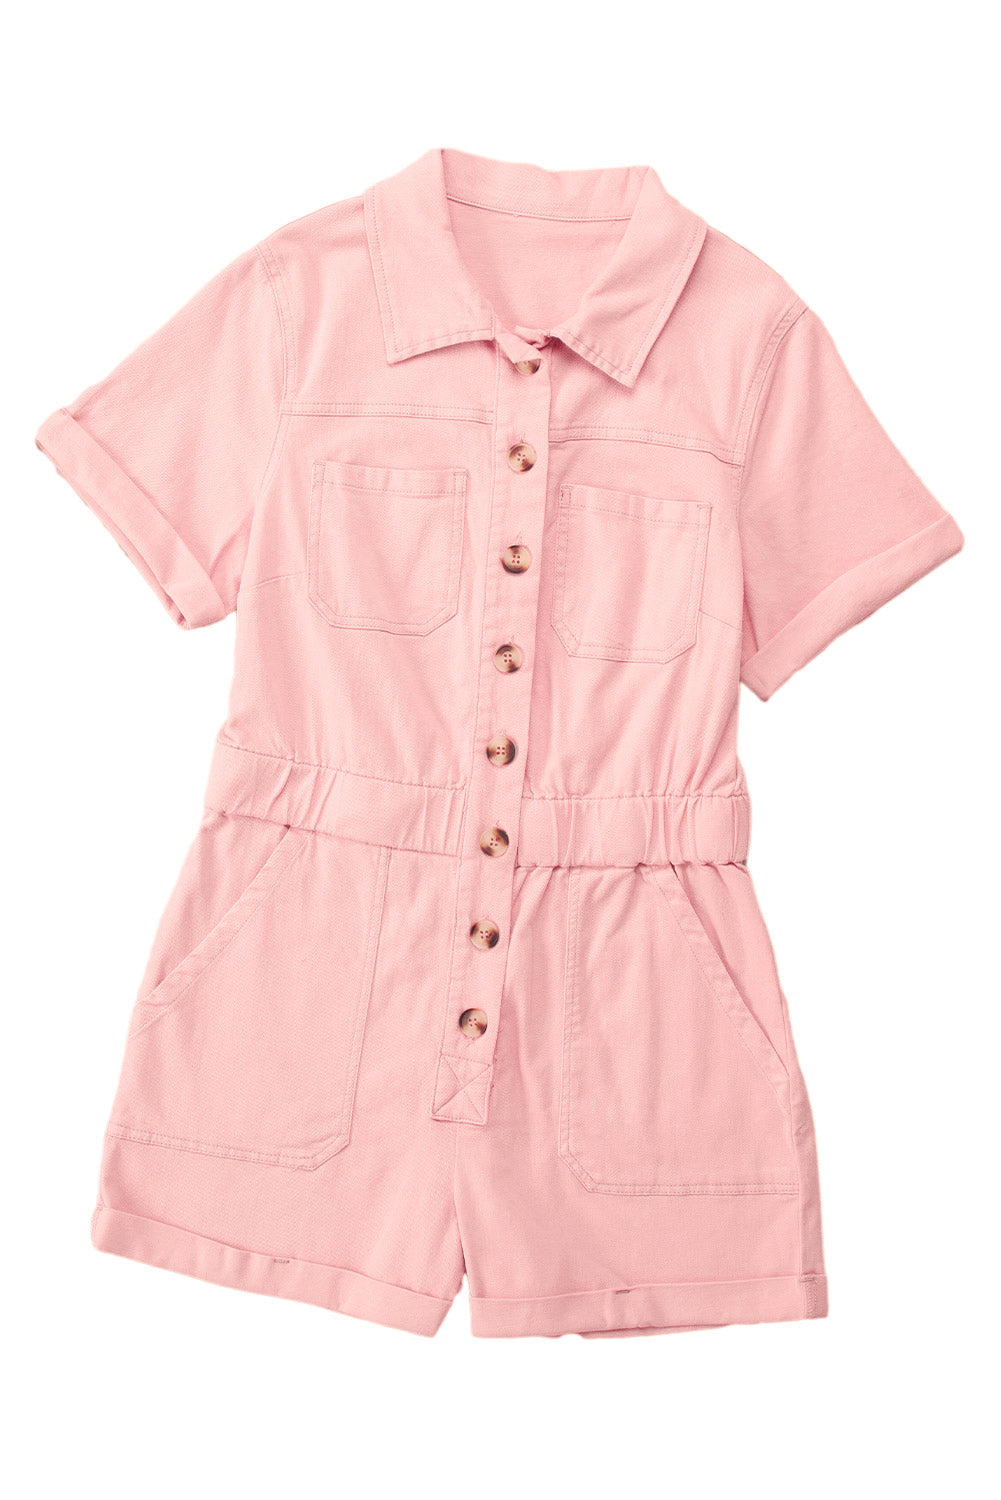 Pink Button Up Short Sleeve Denim Romper with Pockets